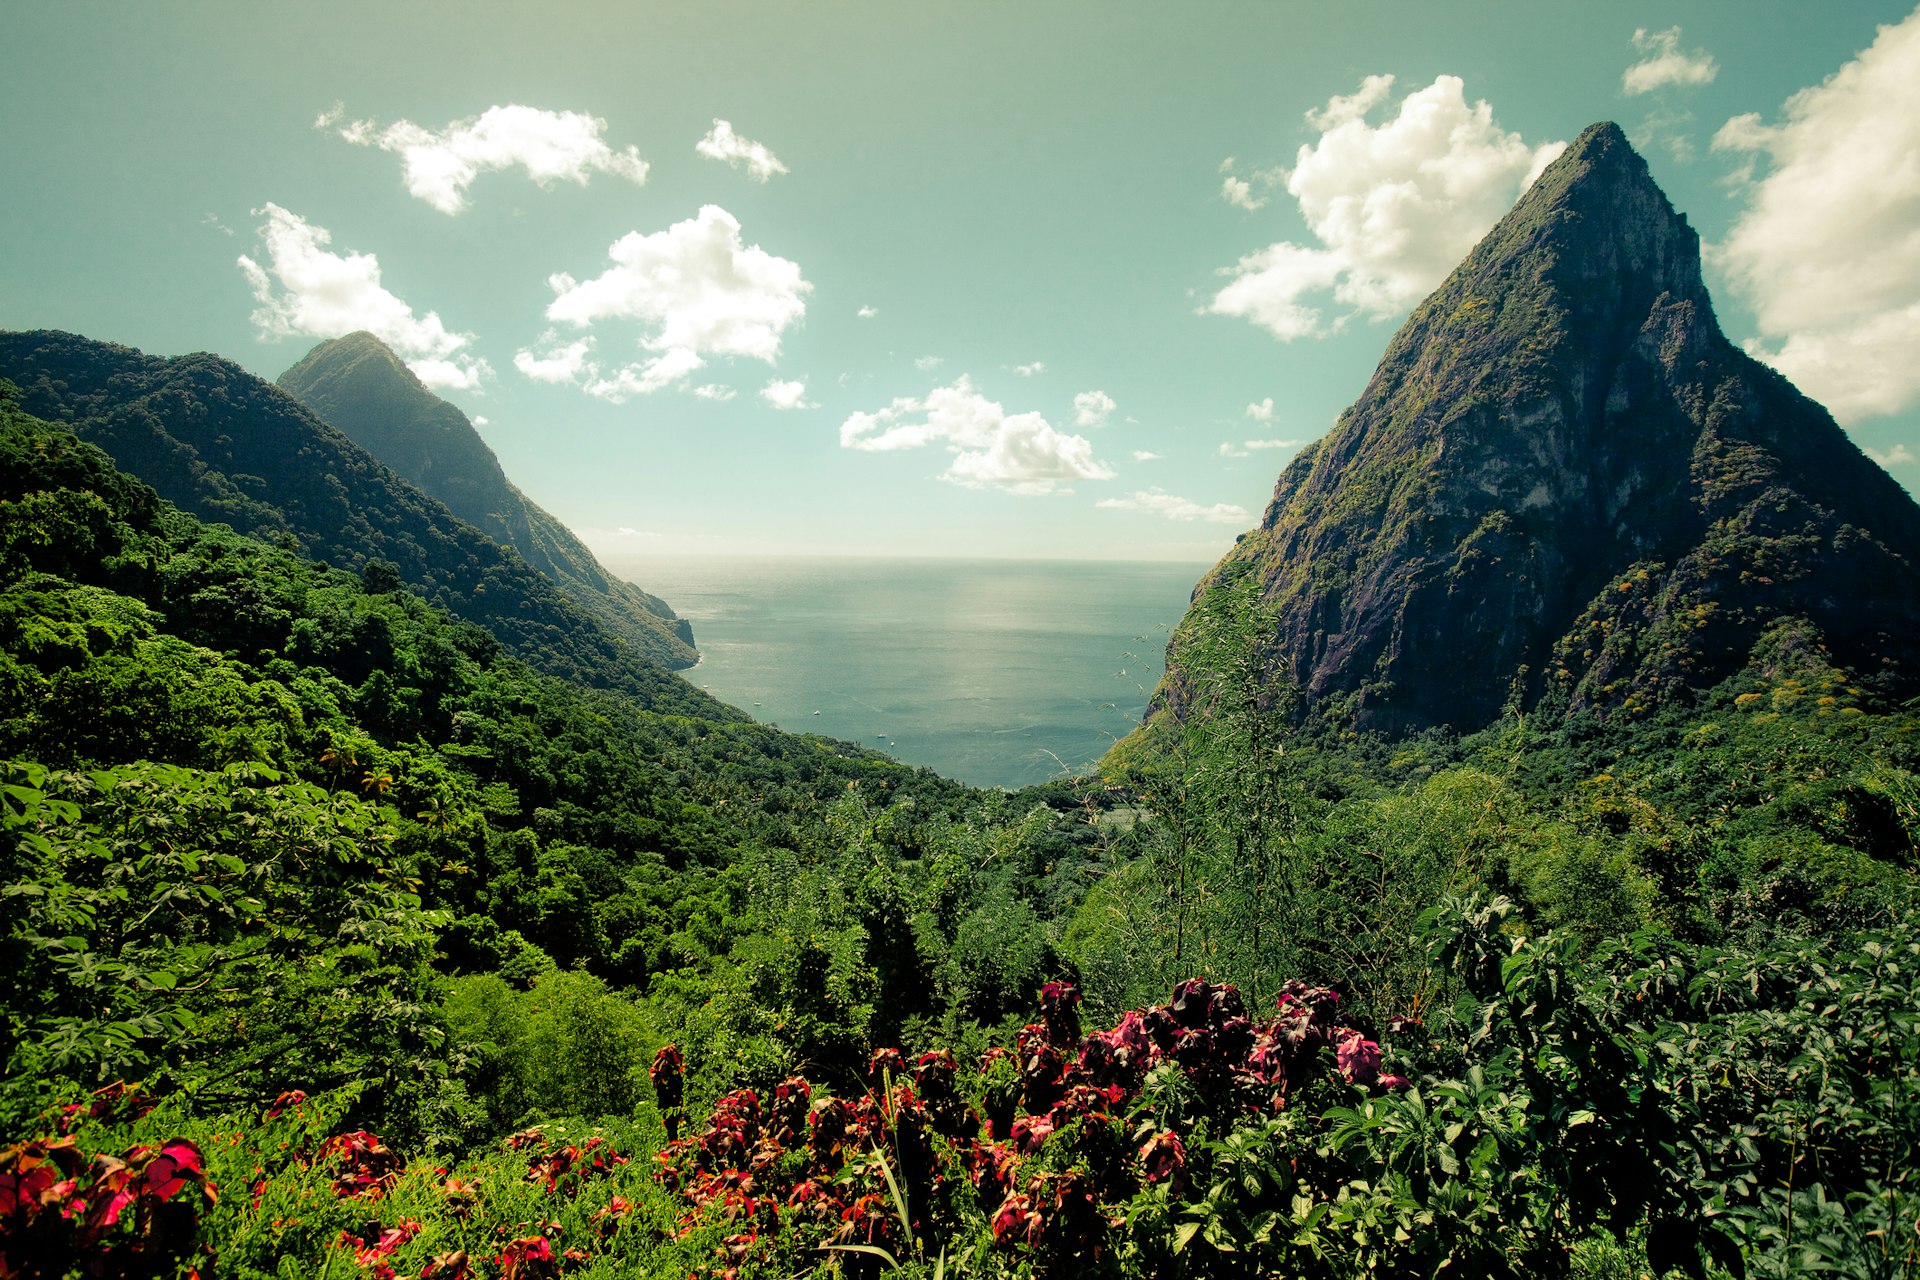 View of the verdant Pitons in St Lucia Pitons with the Caribbean Sea beyond